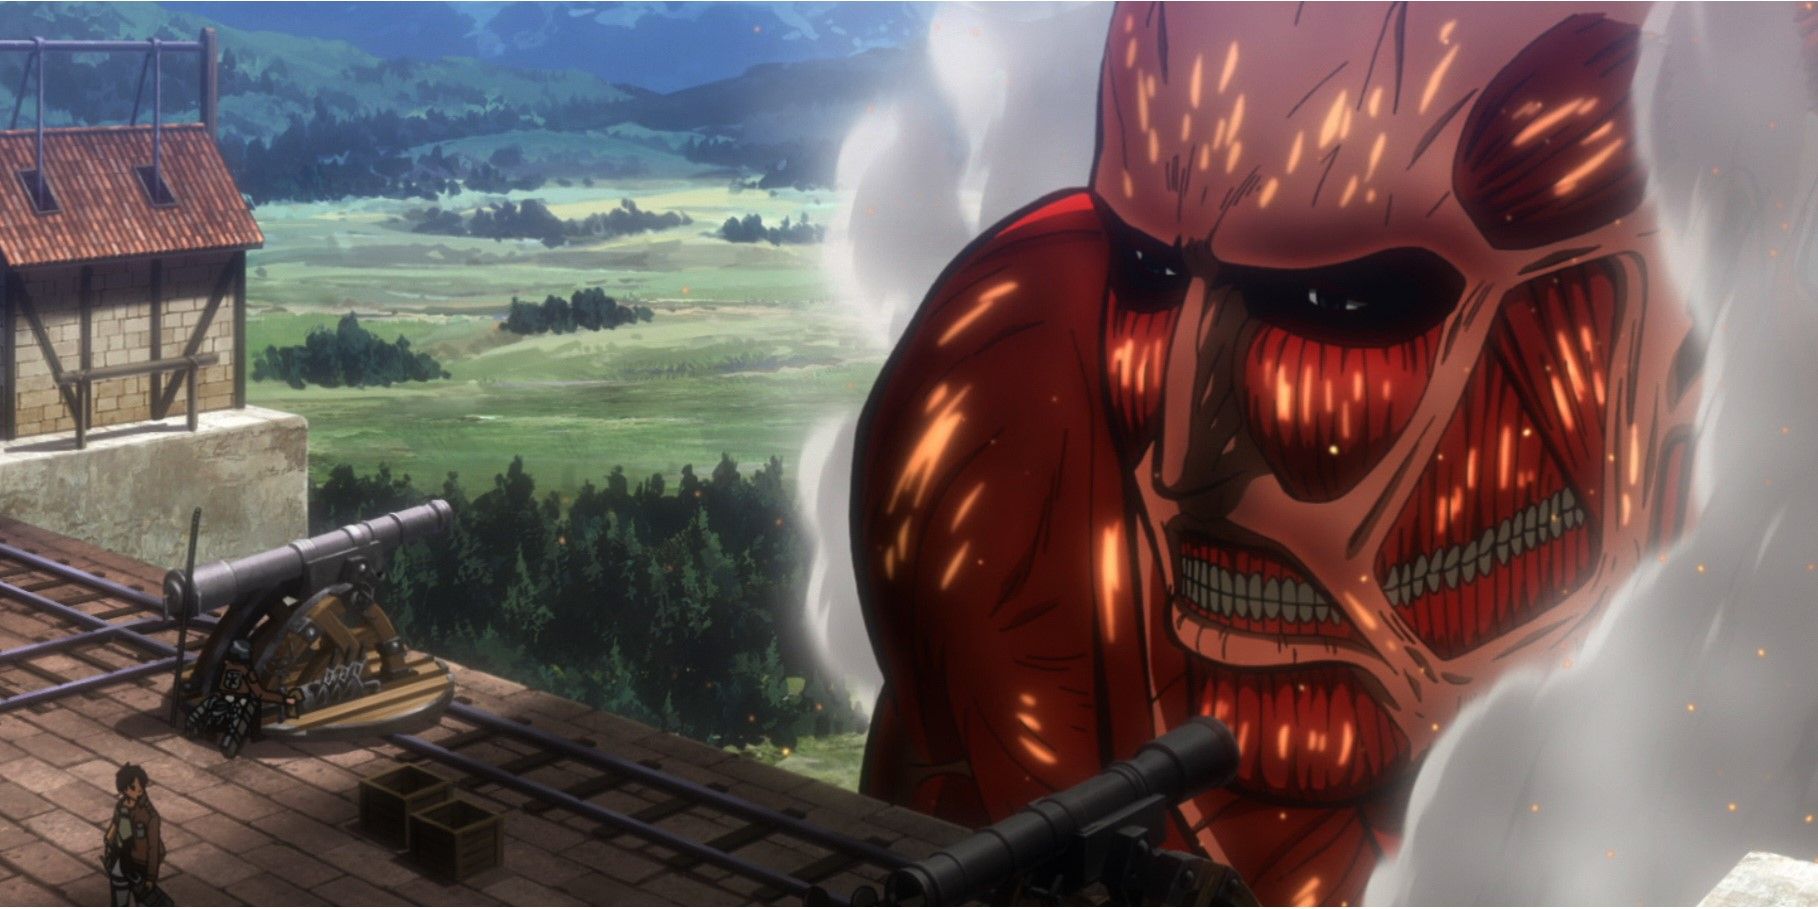 Colossal Titan looking at Eren